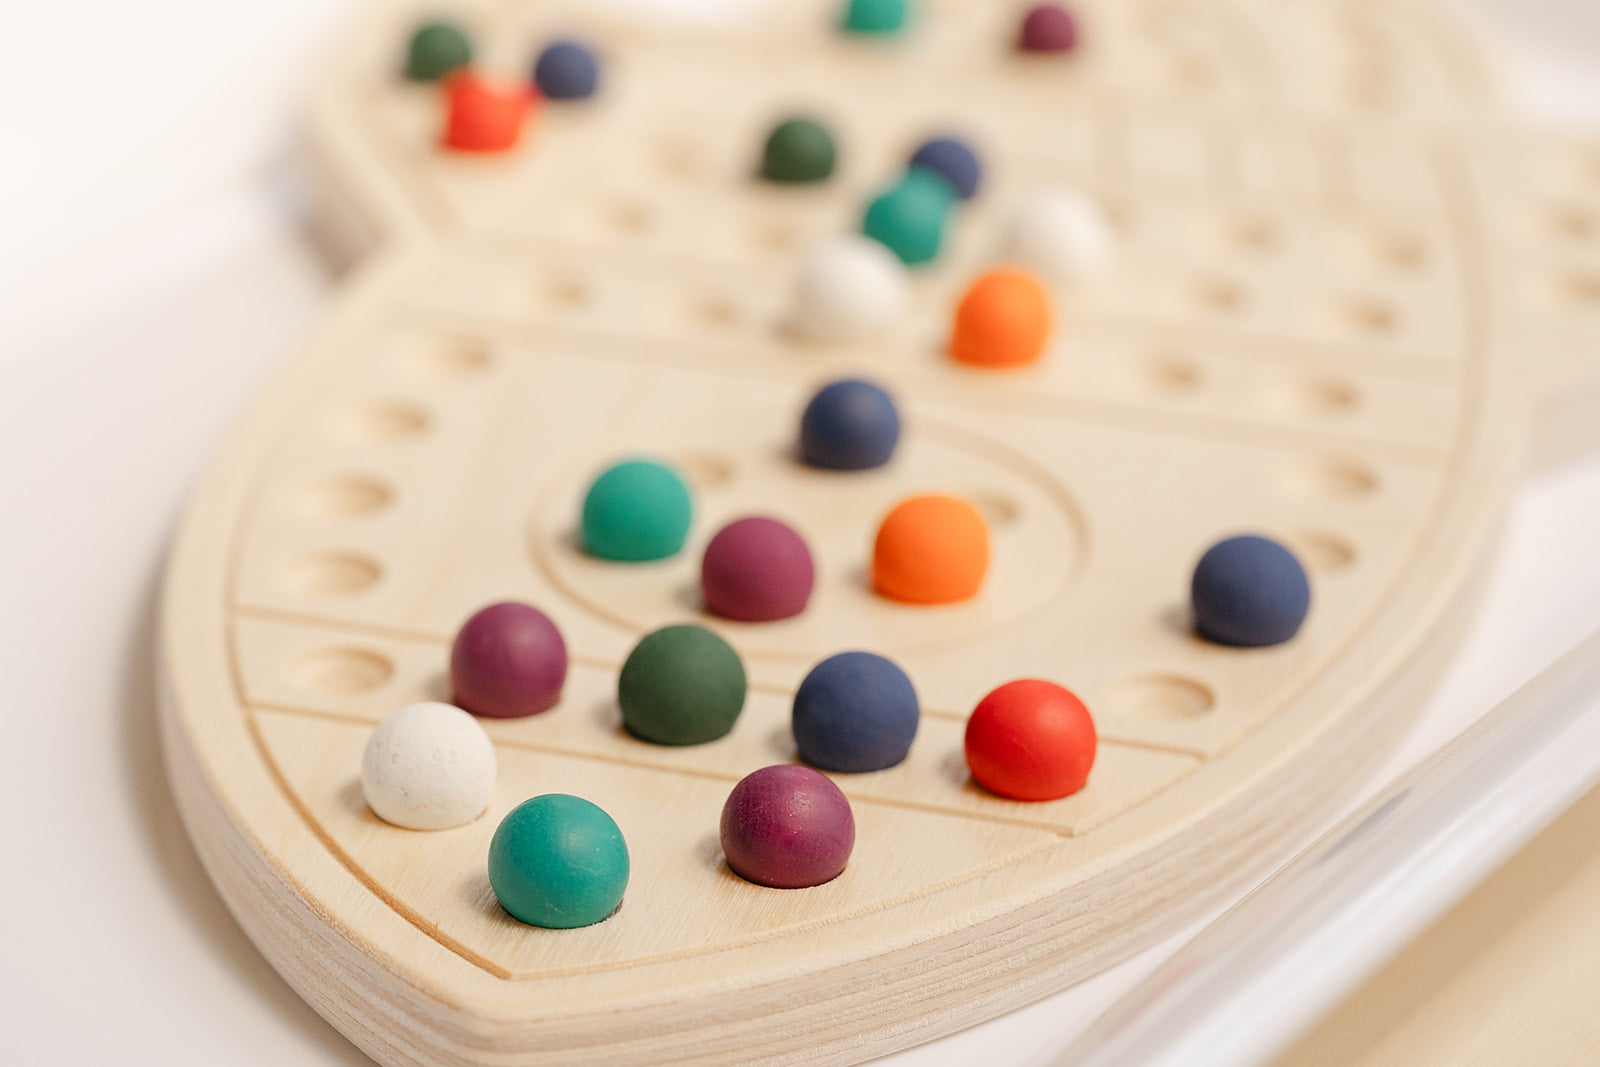 Close up picture of a rocket-shaped activity board with wooden colorful balls